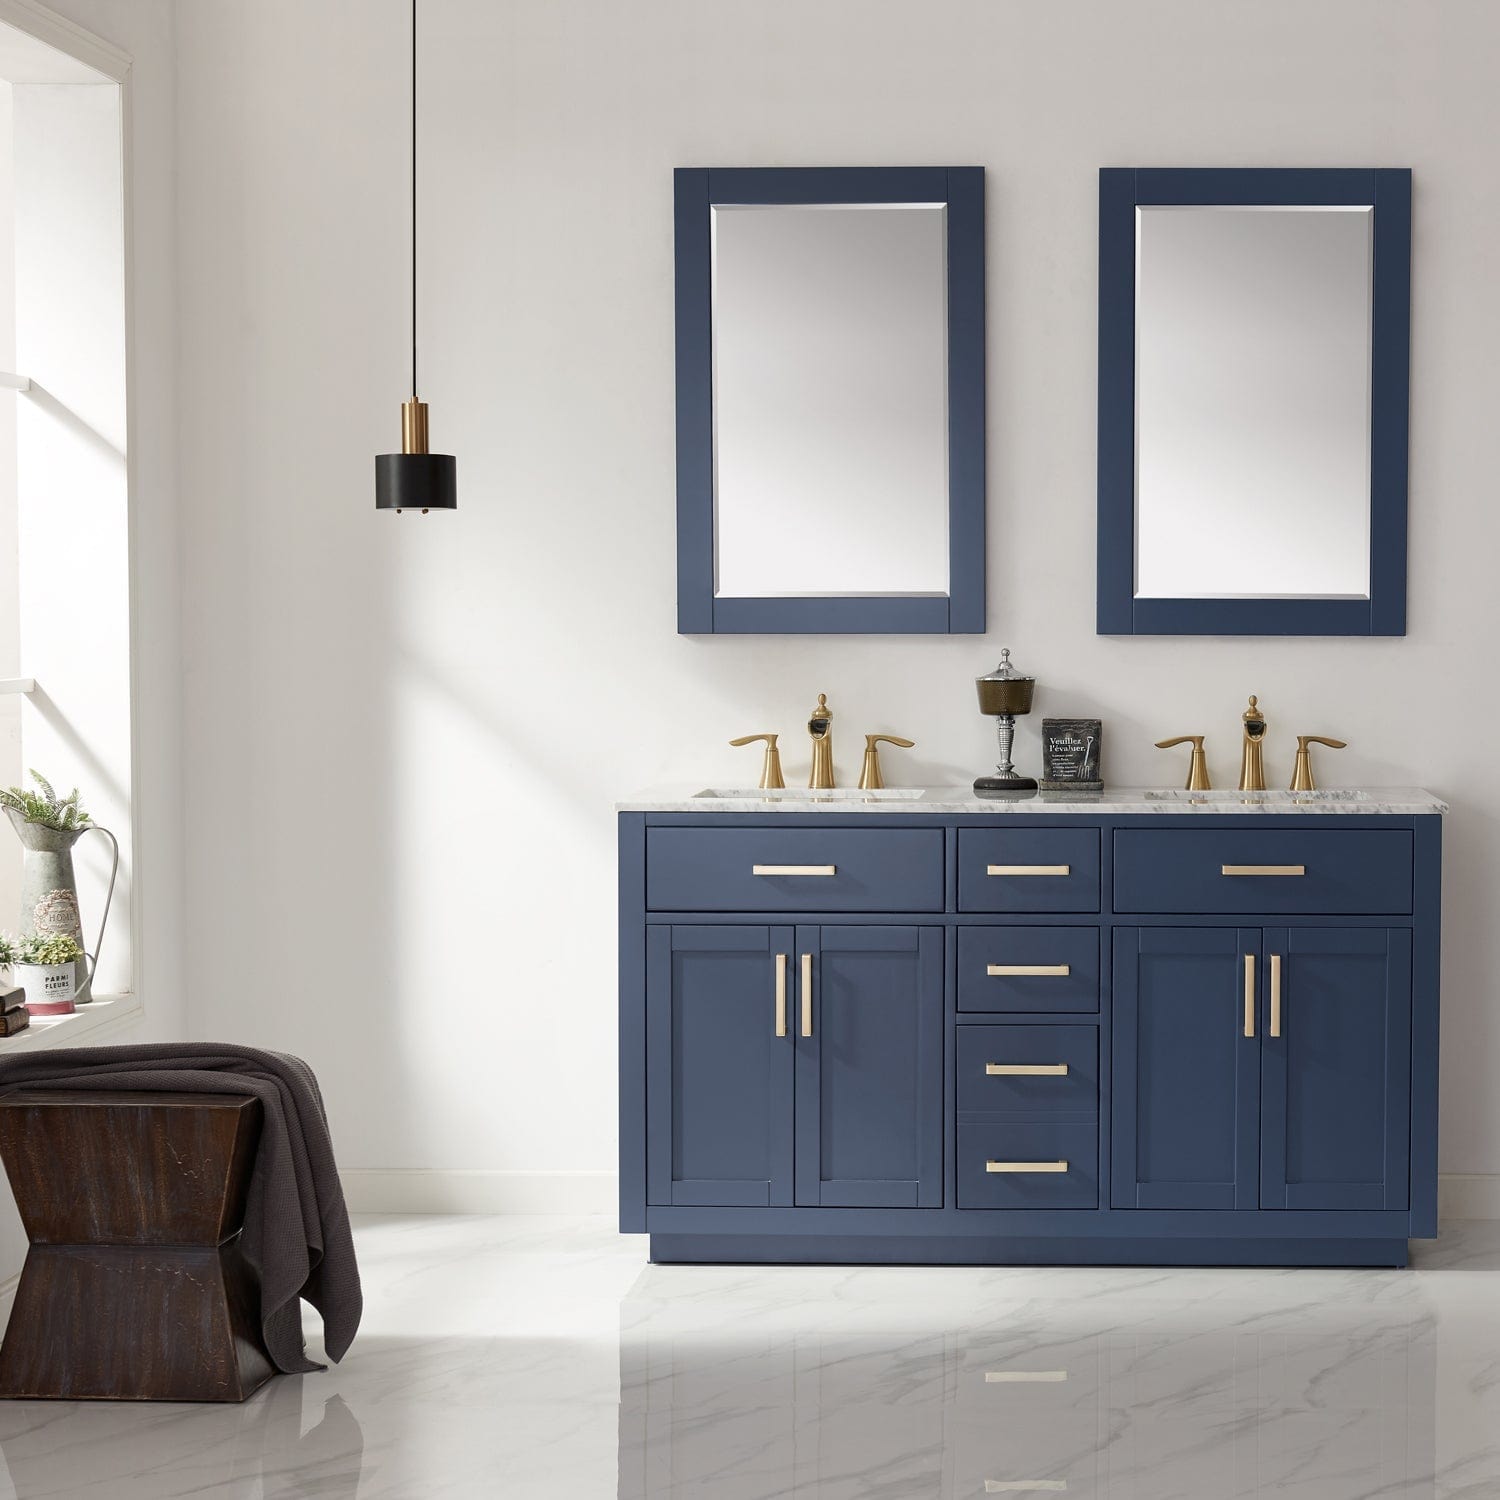 Altair Ivy 60" Double Bathroom Vanity Set in Royal Blue and Carrara White Marble Countertop with Mirror 531060-RB-CA - Molaix631112971232Vanity531060-RB-CA